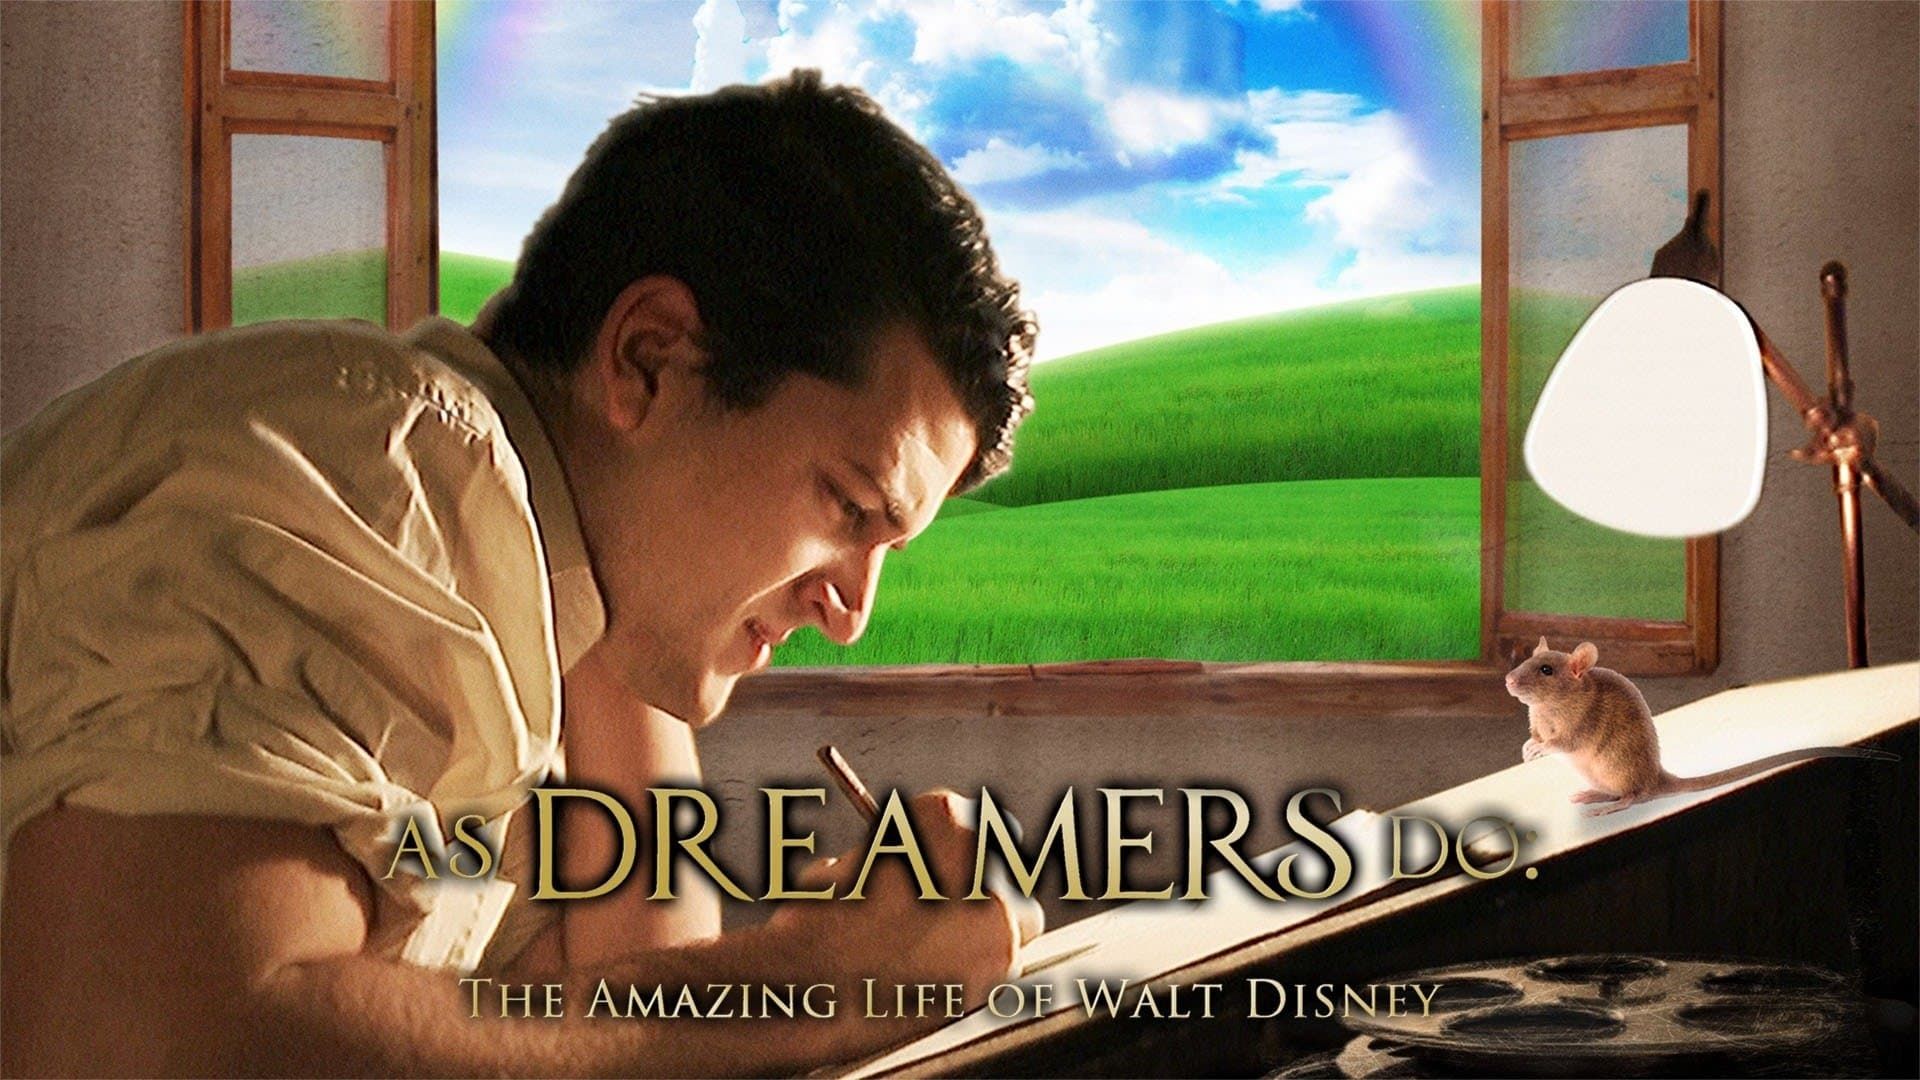 As Dreamers Do background